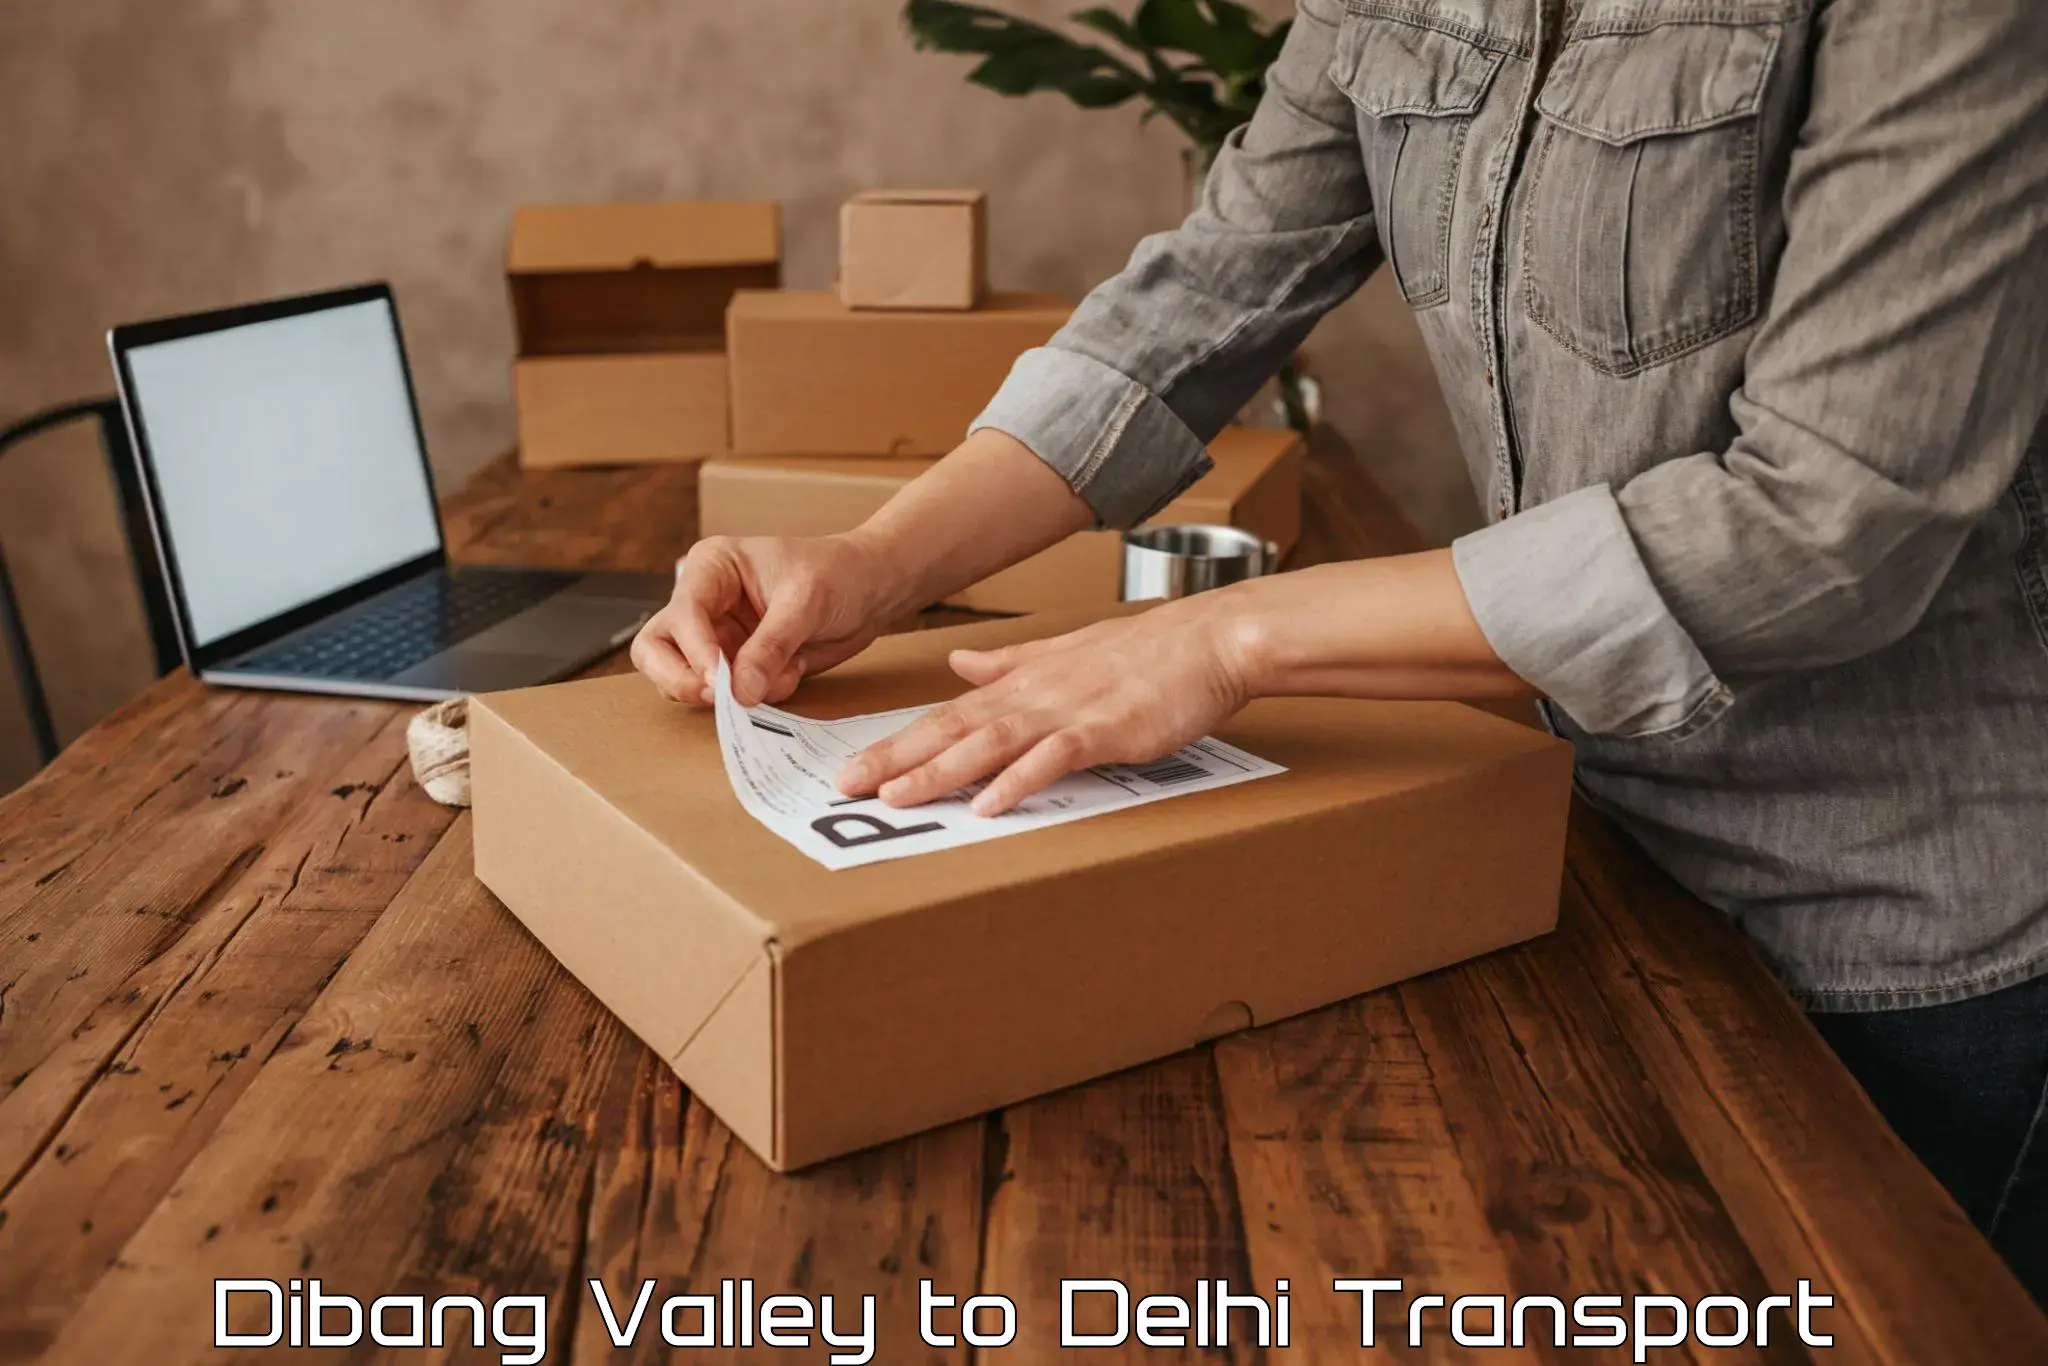 Nationwide transport services Dibang Valley to University of Delhi